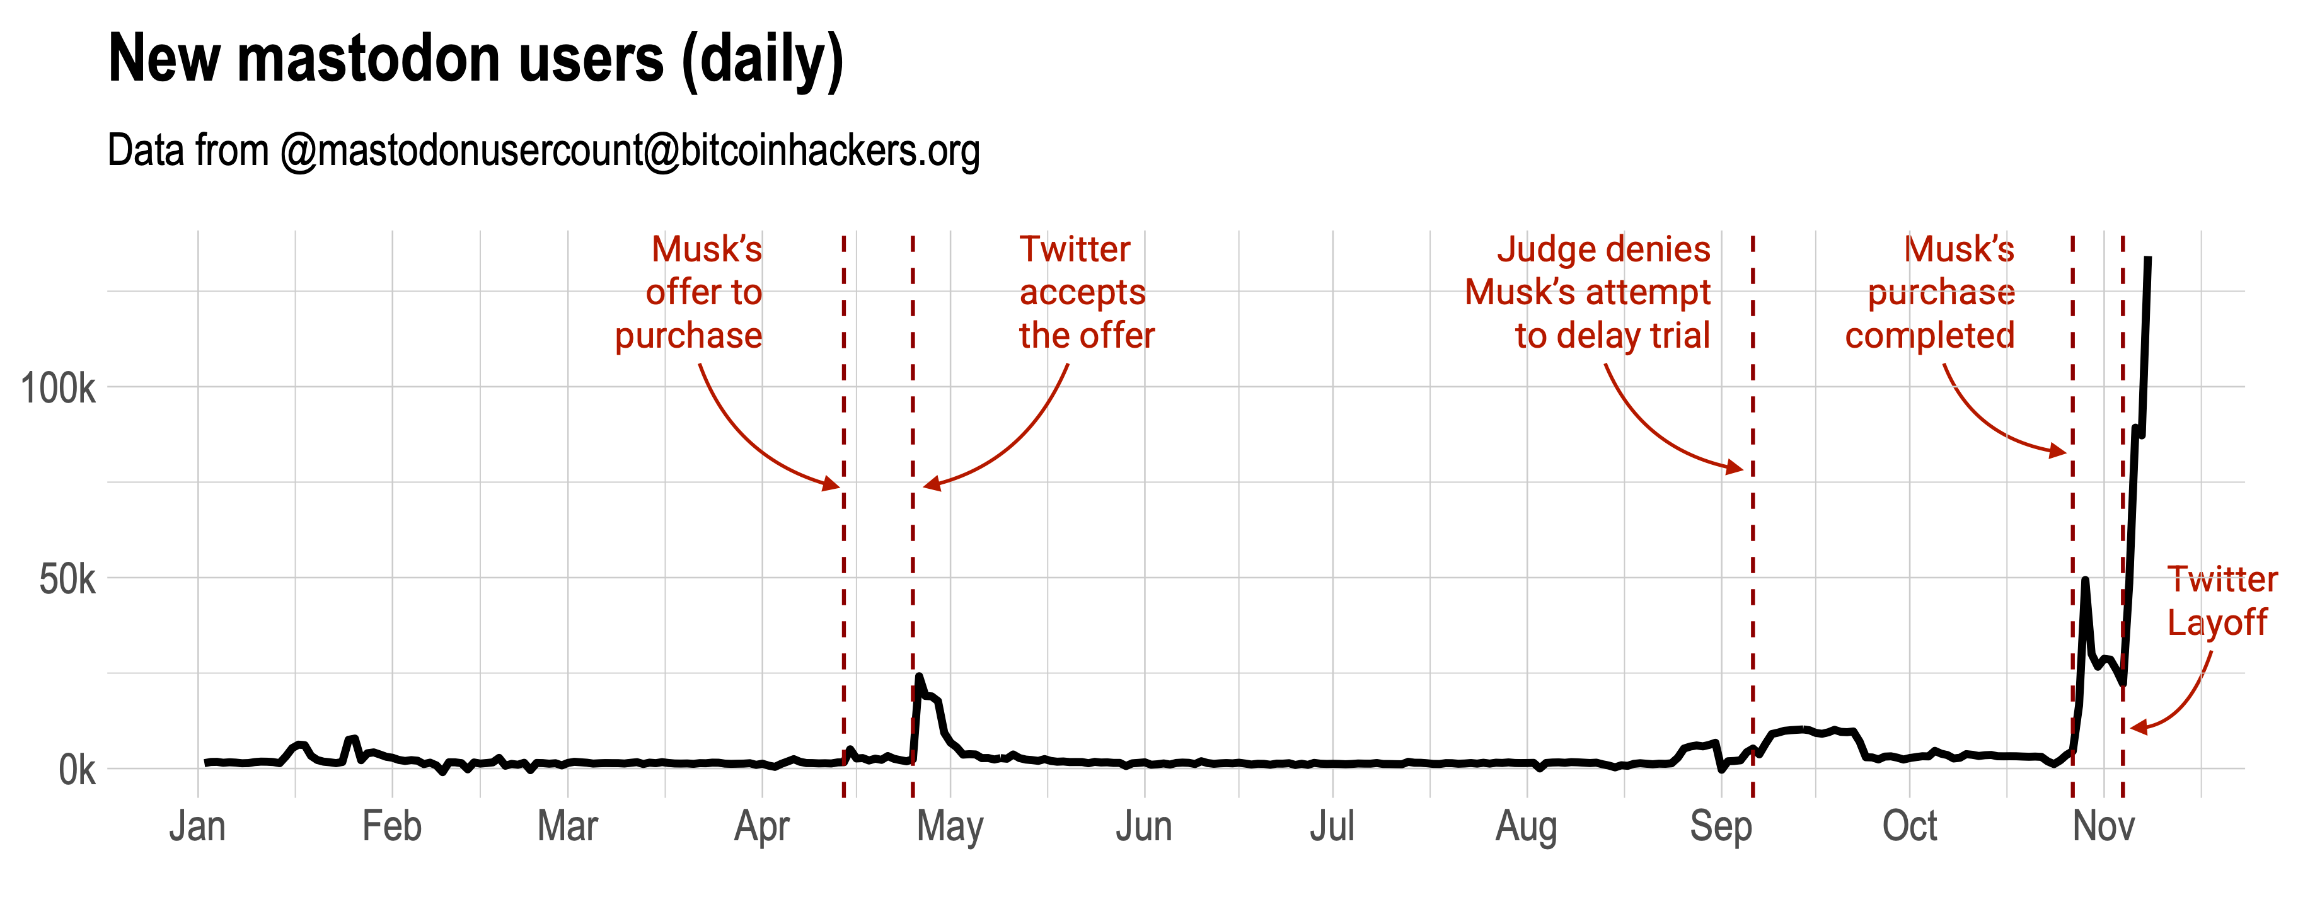 The graph shows the evolution of the new users that join mastodon by day during the last year. The numbers are very small until recently, but we can see that 25k users join platform when Musk made the offer to purchase and was accepted in May. More <br />recently, around 50k to 100k users join the platform everyday after the purchase was completed and the massive layoffs at Twitter. And the numbers of new daily users keeps growing